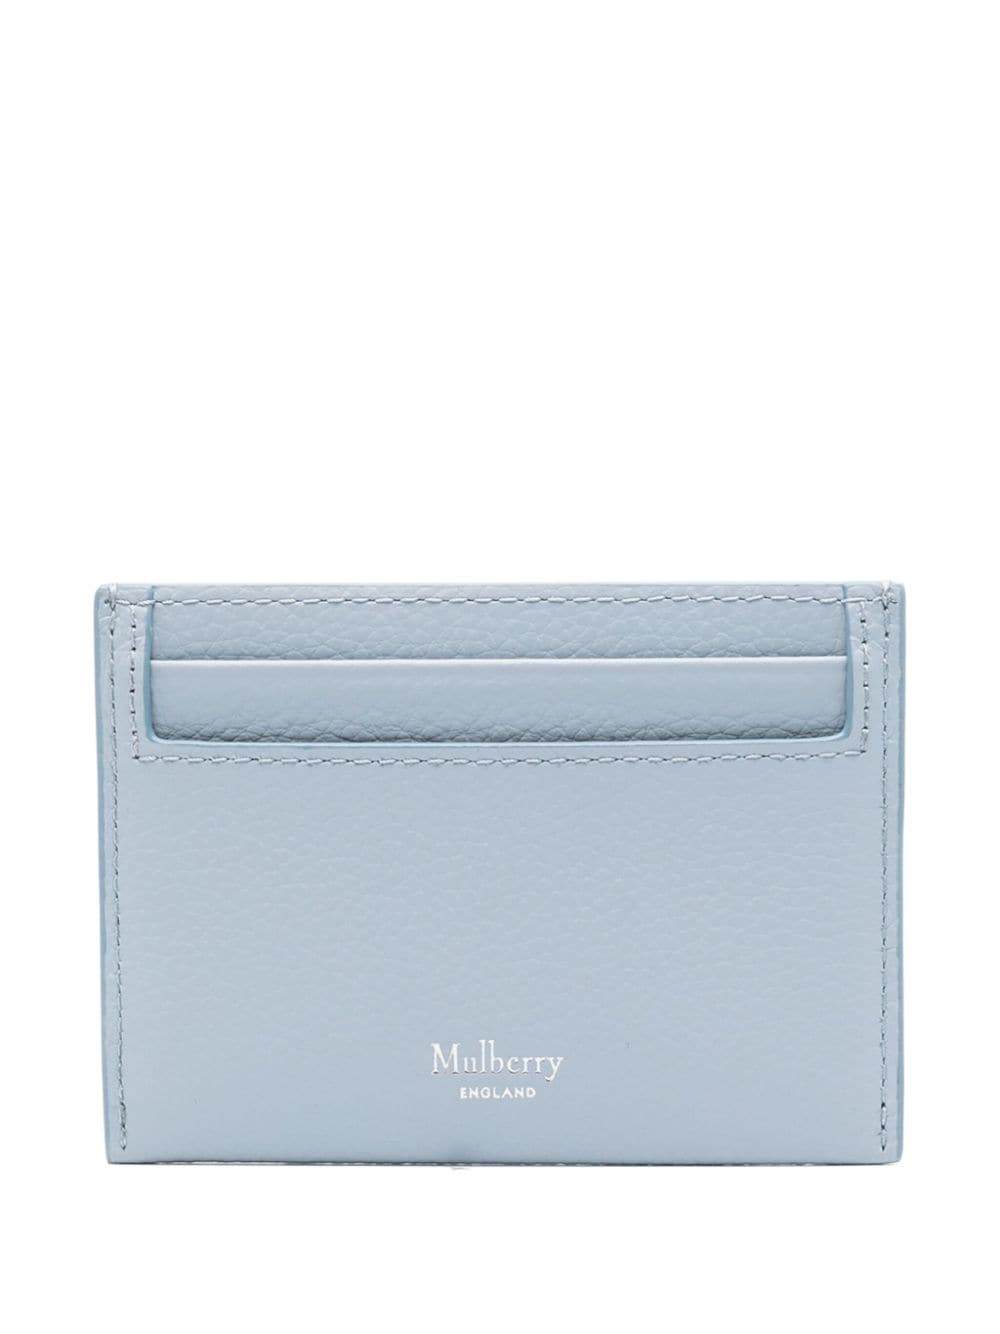 Mulberry Continental leather cardholder - Blue von Mulberry